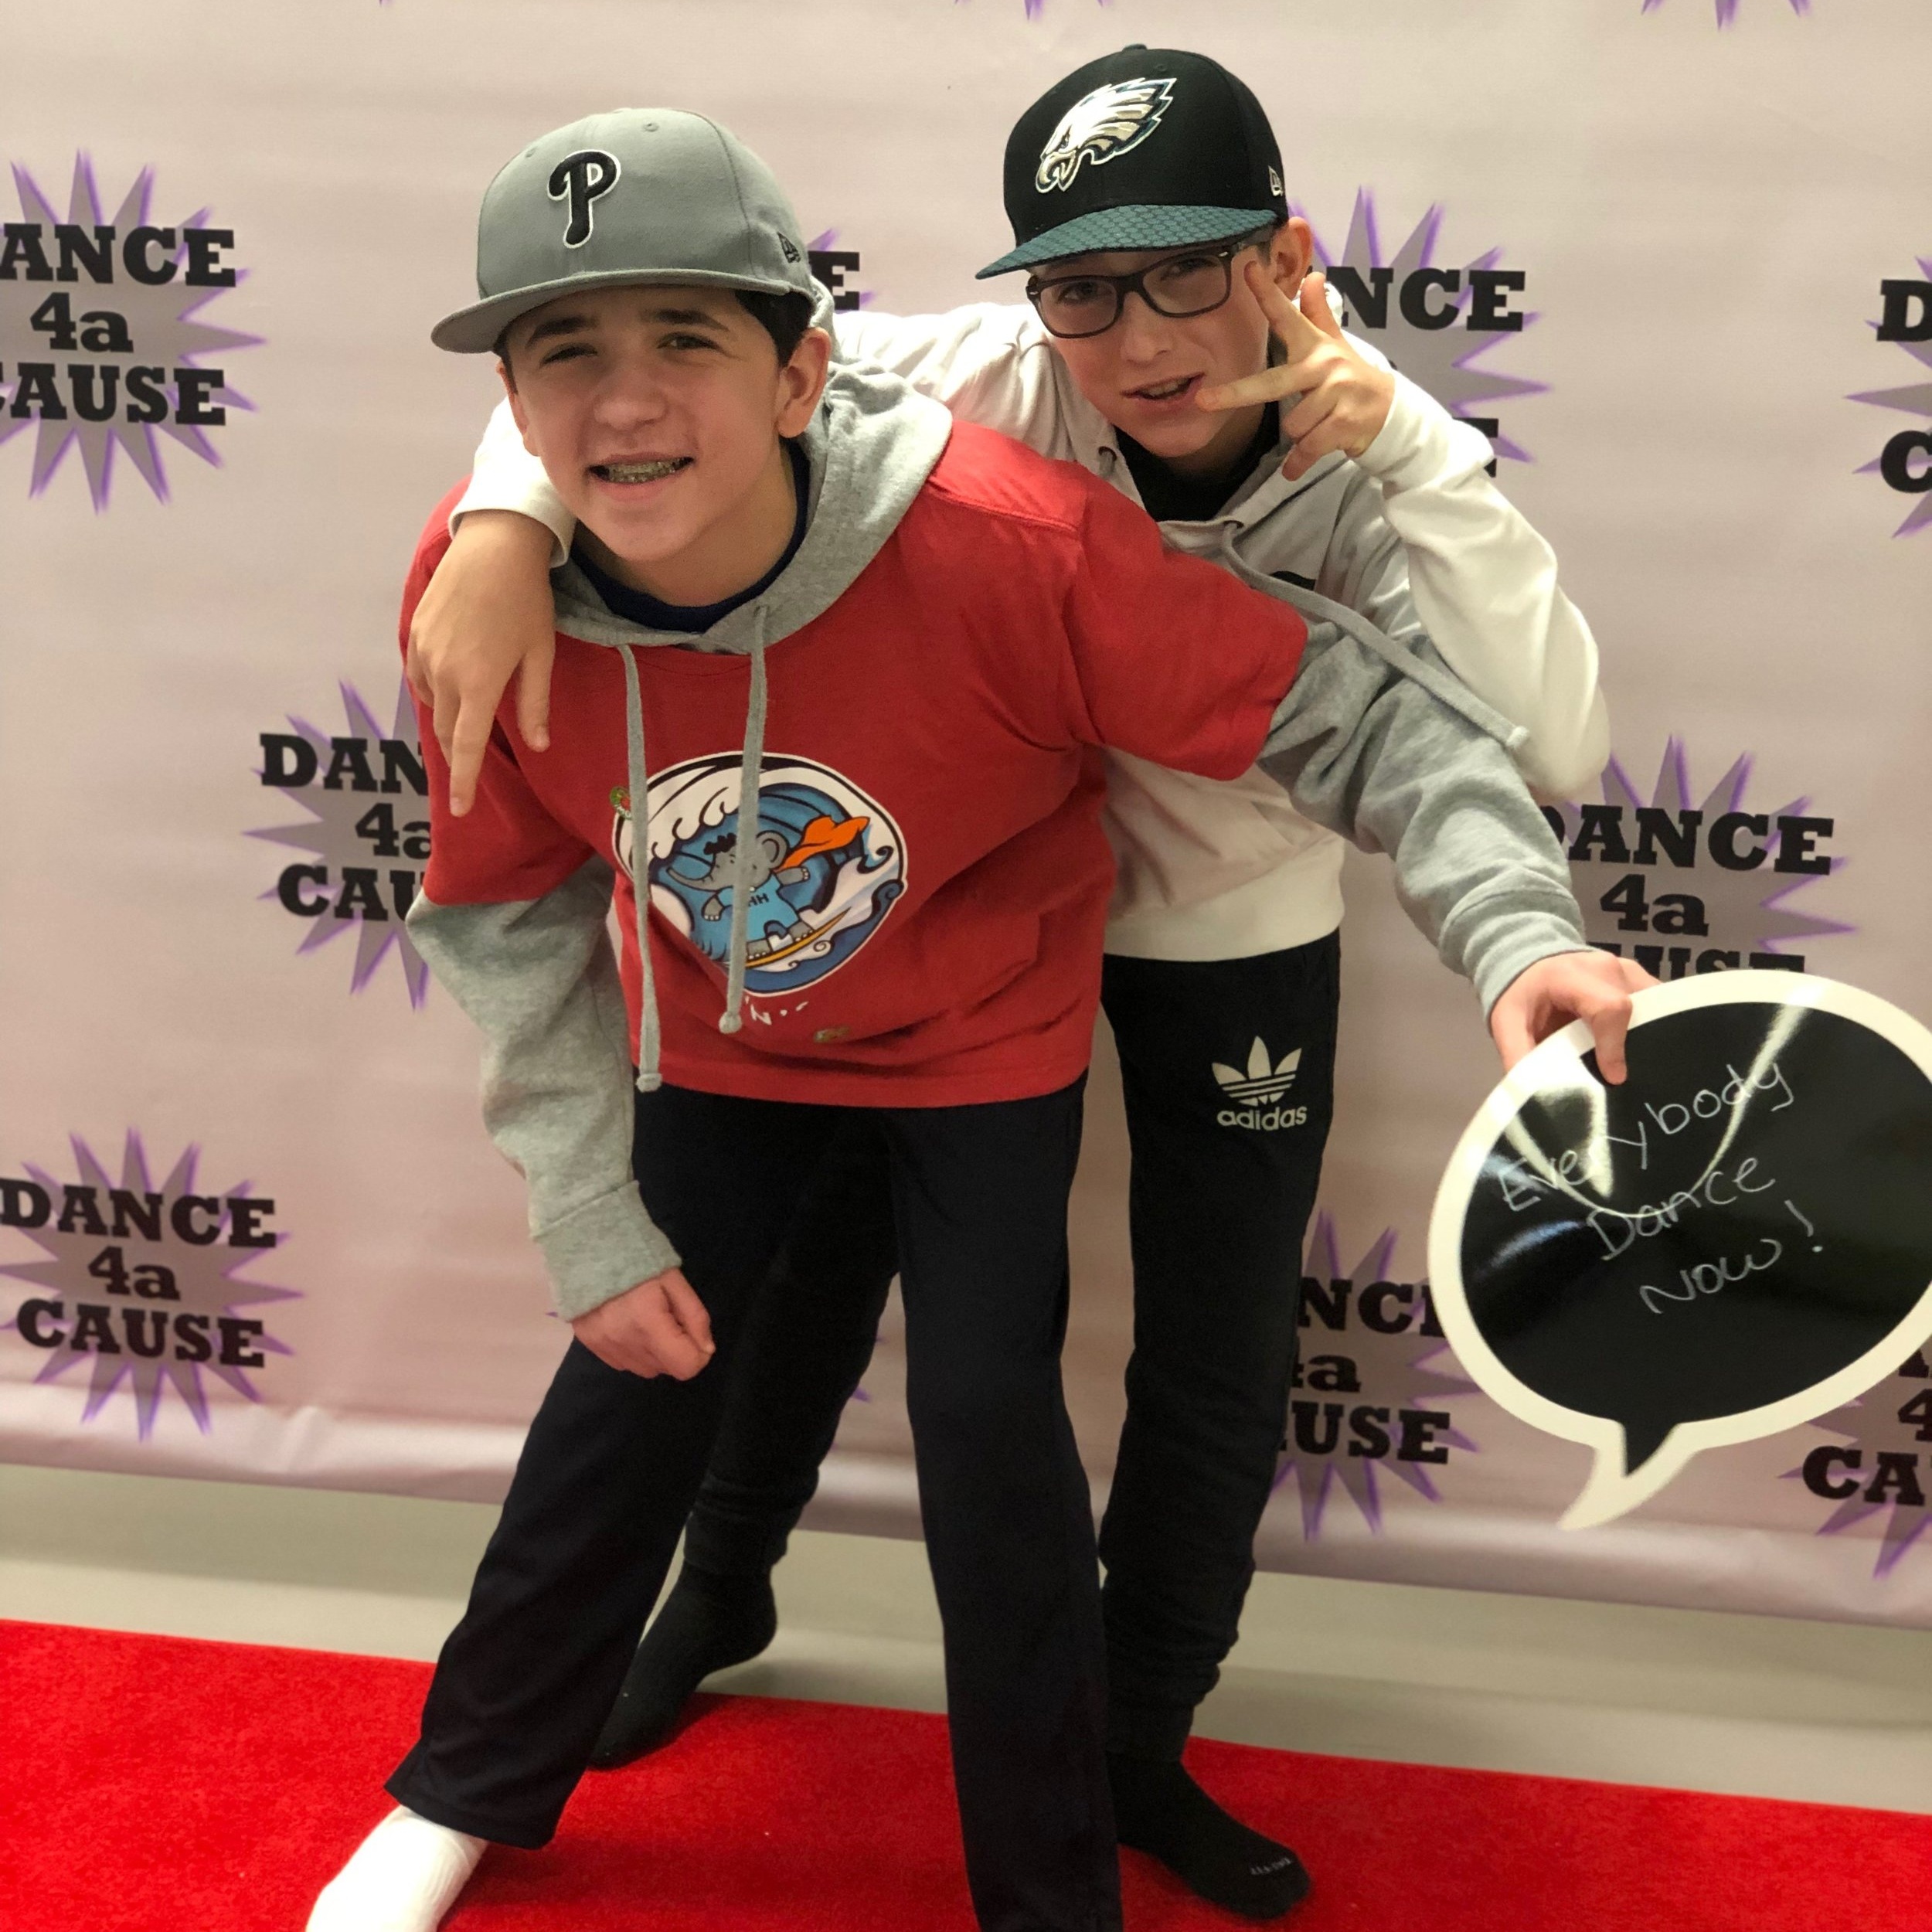  Chase and Sam at a Holton’s Heroes dance event for special needs kids. 